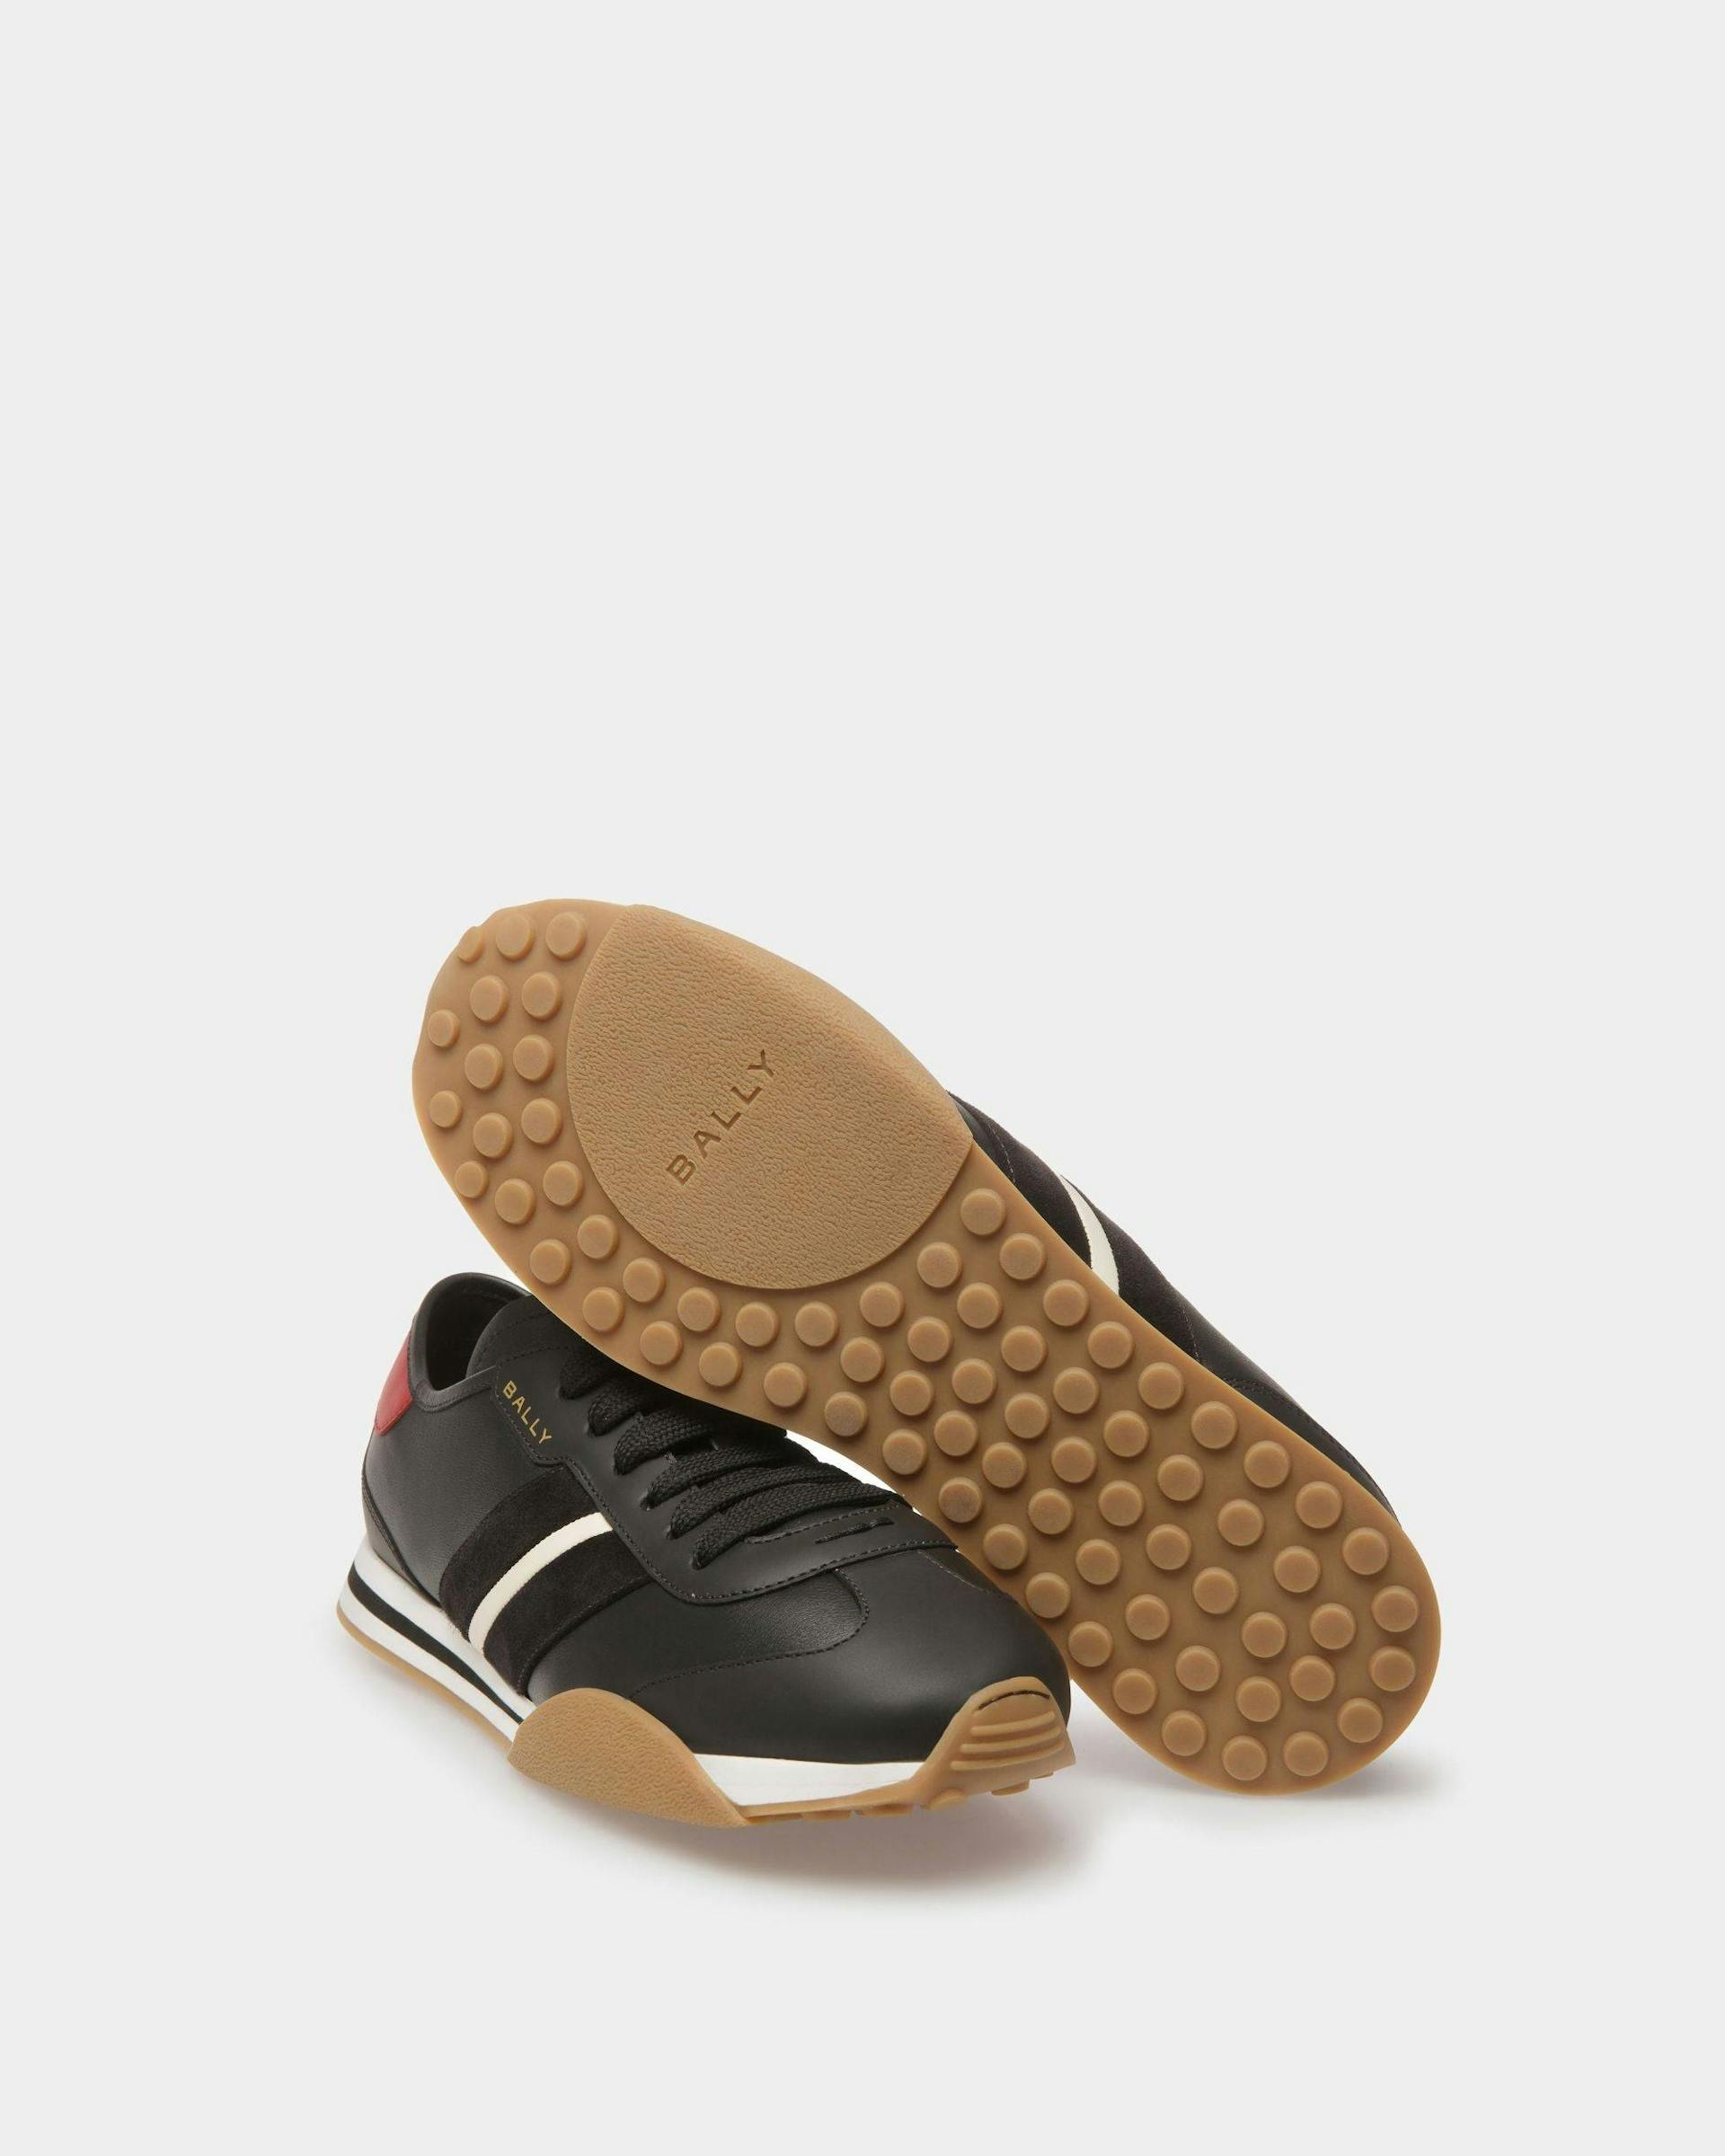 Men's Sussex Sneakers In Black, Bone And Deep Ruby Leather | Bally | Still Life Below